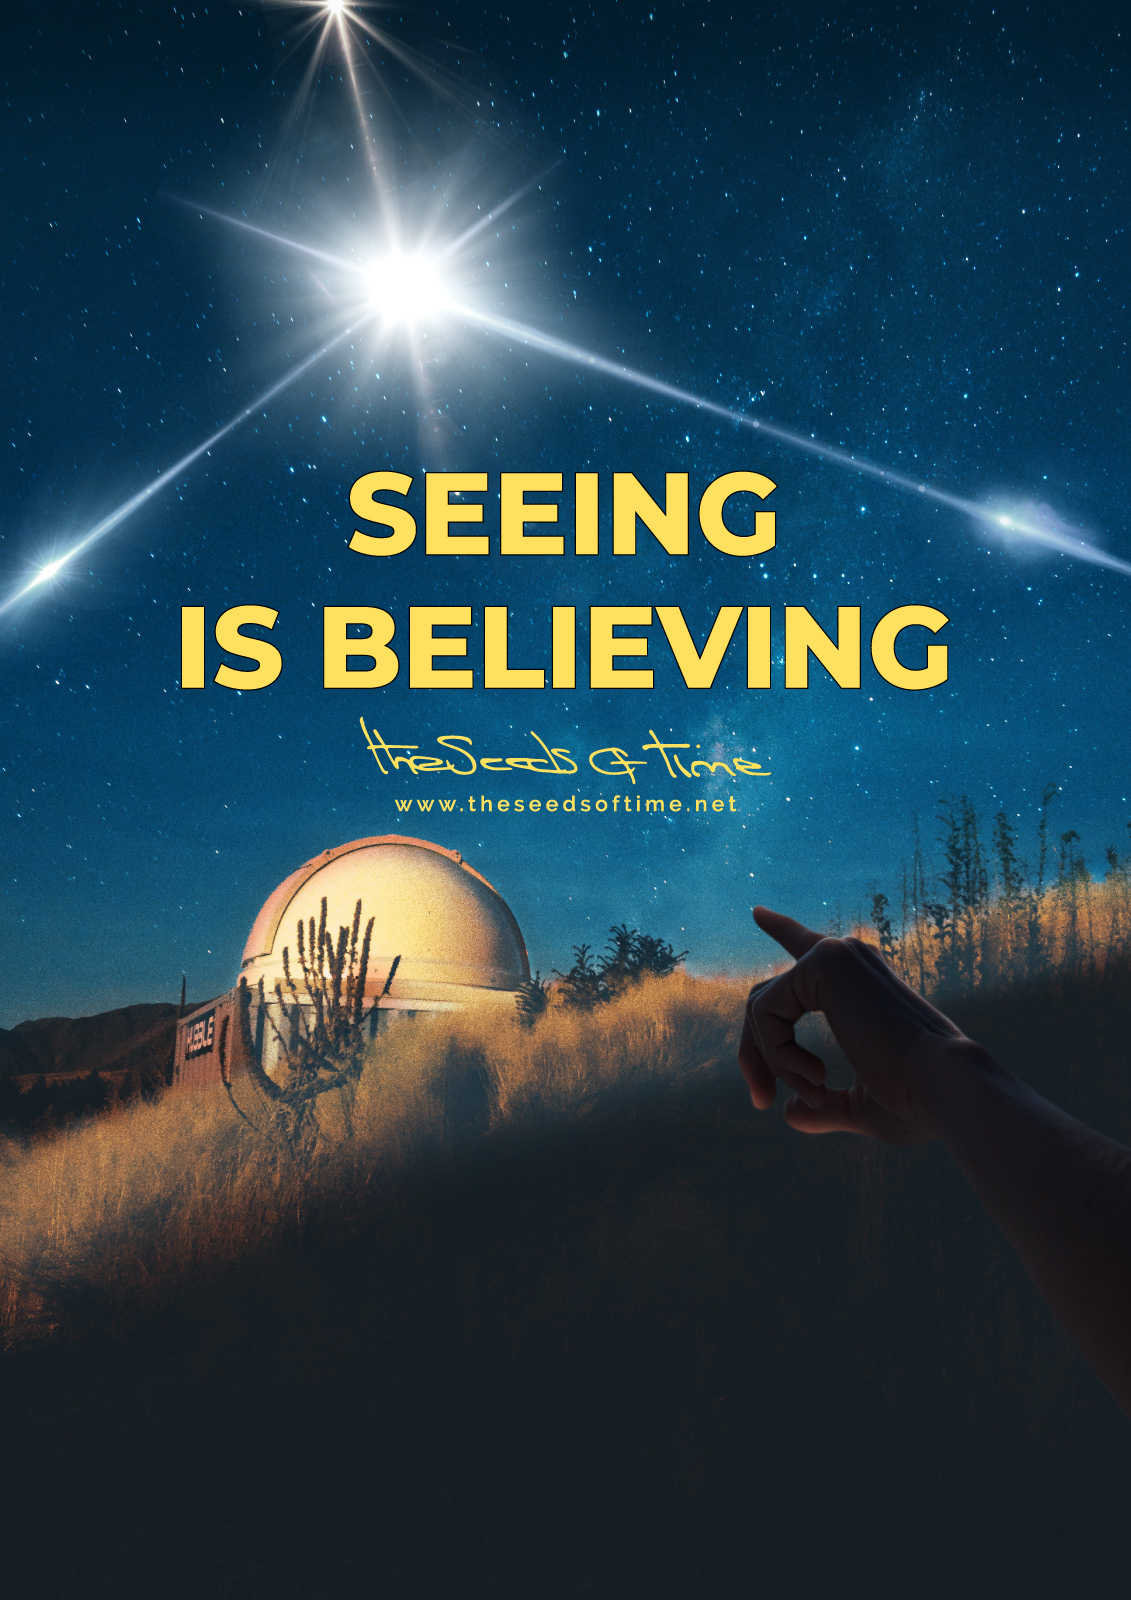 Poster art for song 'Seeing is believing' from album titled Random Exposure by The Seeds of Time on which there is shown a research telescope and a hand pointing towards the dark, stary sky where a bright and unexplained flash of light can be seen